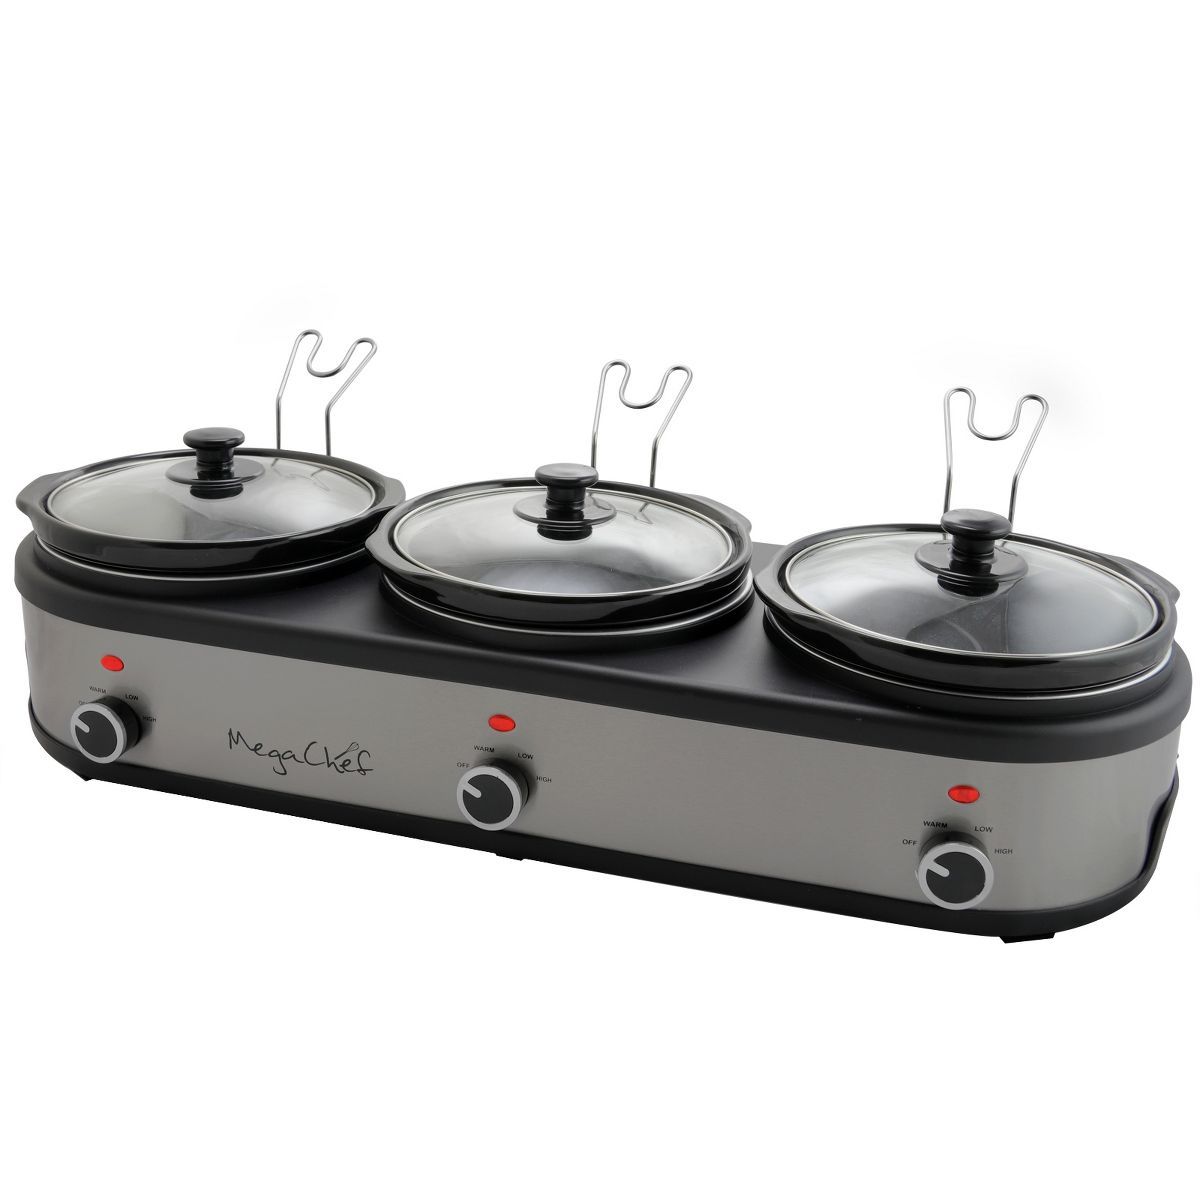 MegaChef Triple 2.5 Quart Slow Cooker and Buffet Server in Brushed Silver | Target